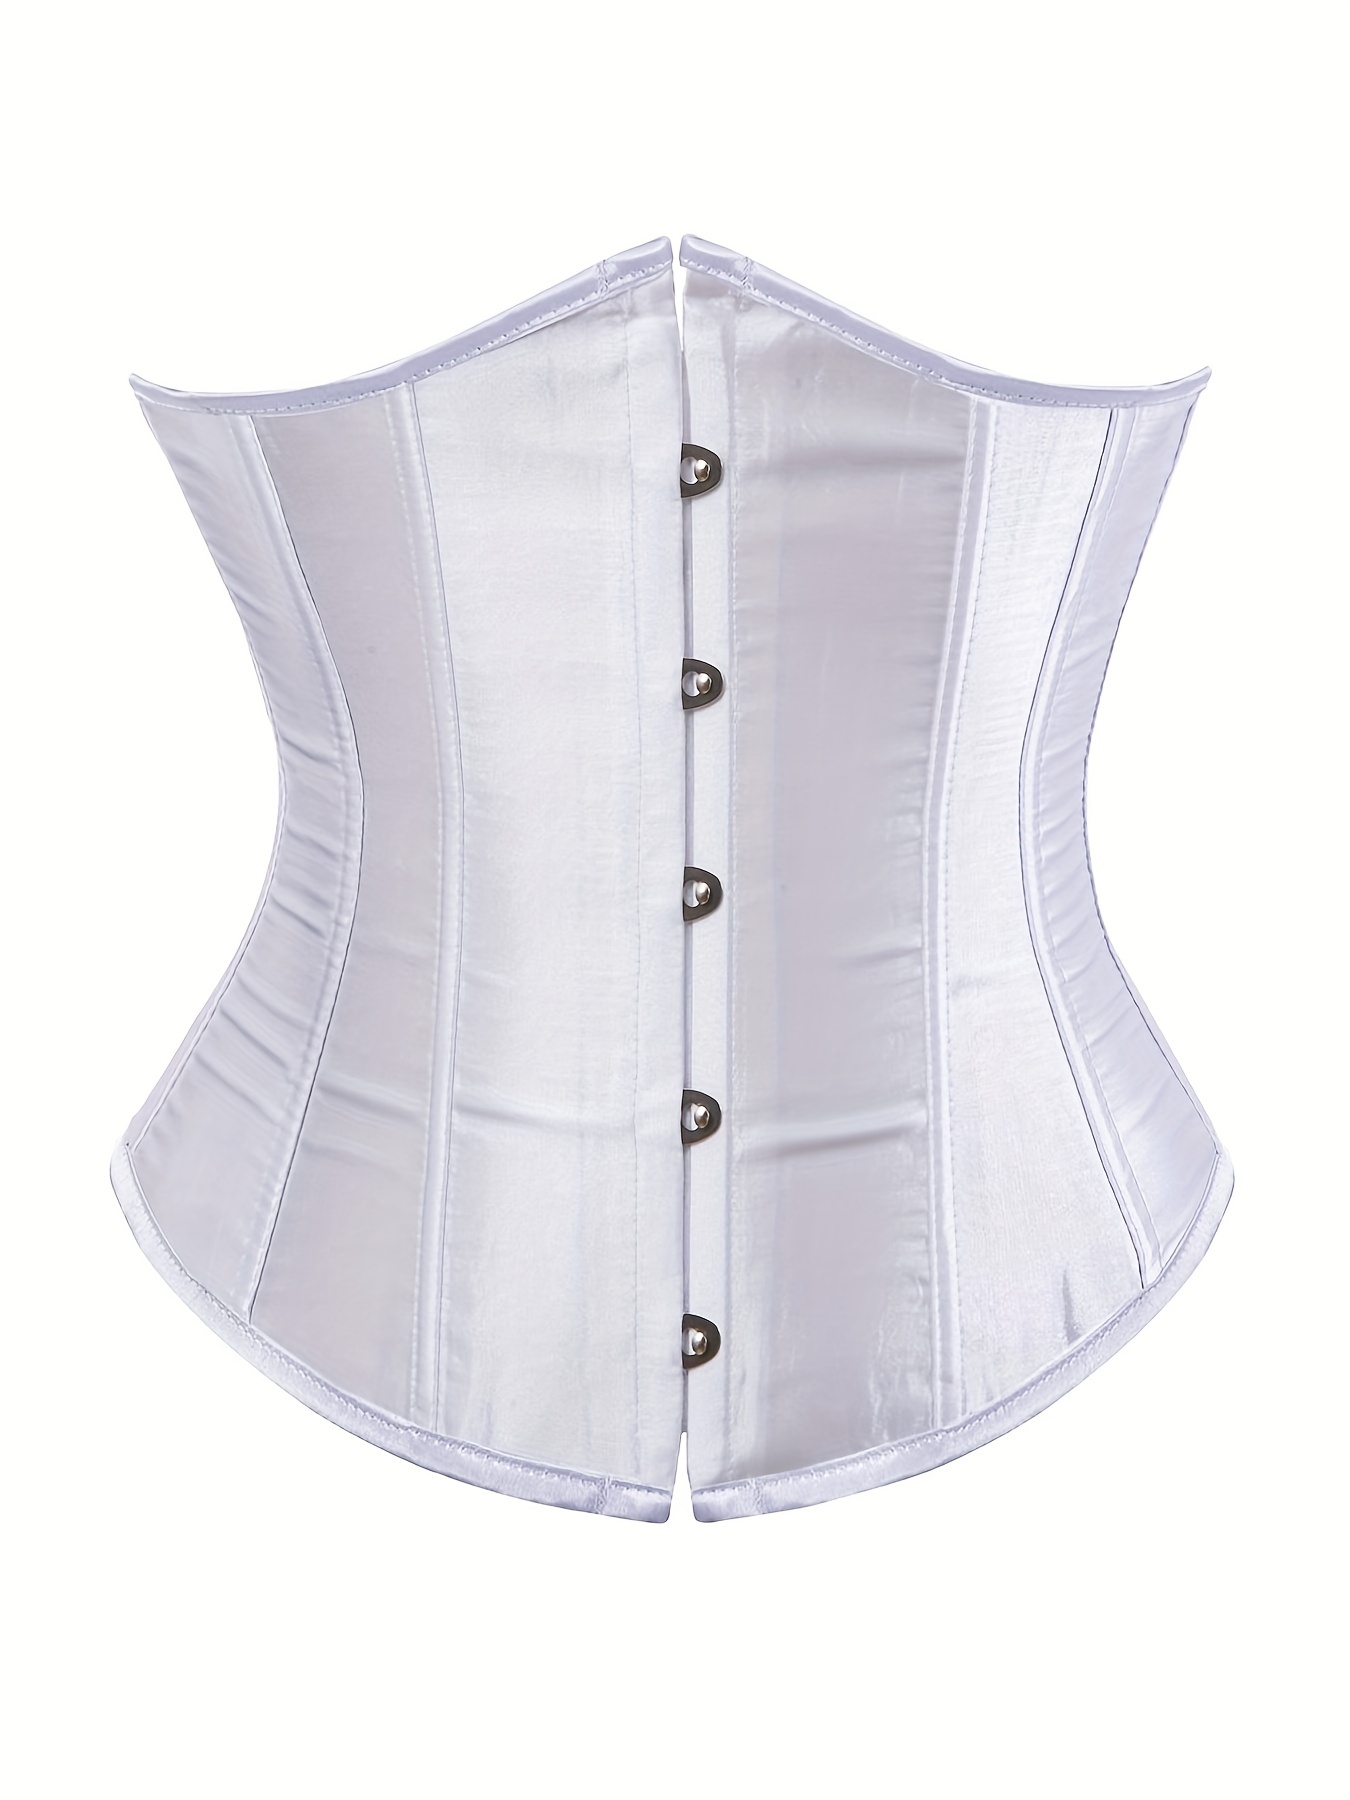 Juicy Couture Corset Small Waist Trainer Intimates Shaper Tummy Cincher